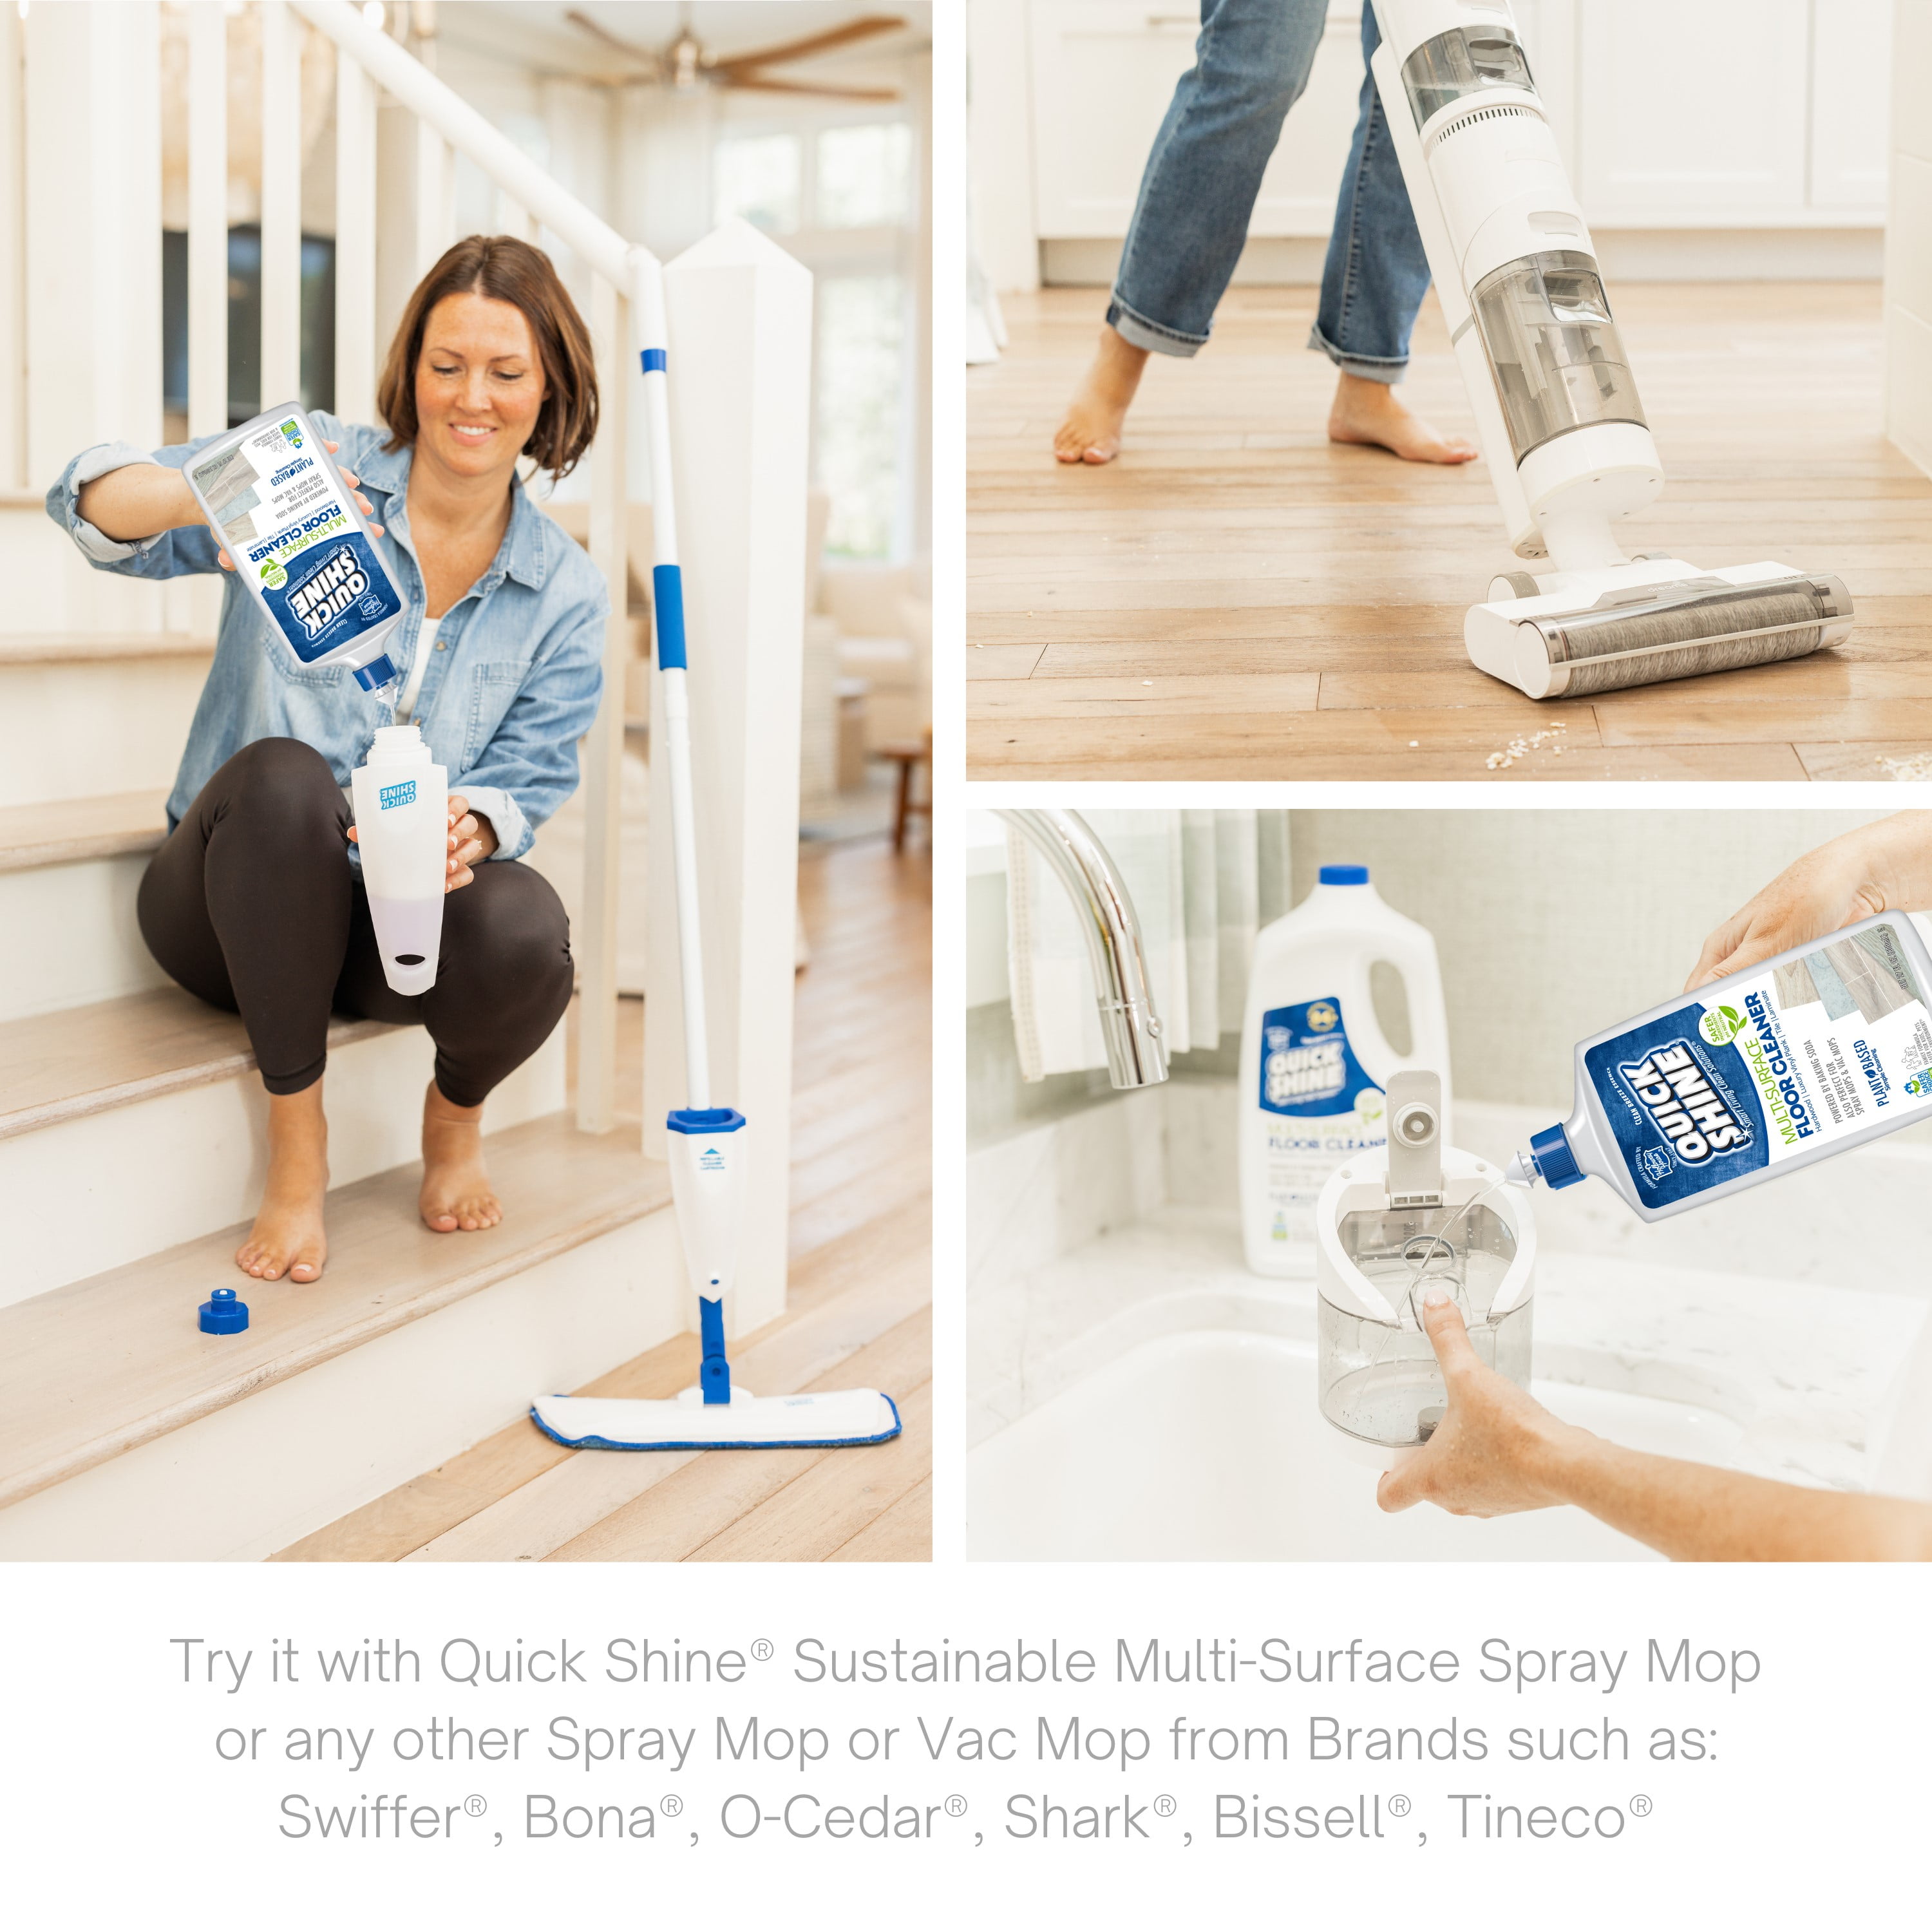 Anne from Indianapolis used Quick Shine® Multi-Surface Floor Cleaner and  Multi-Surface Floor Finish for the fi…